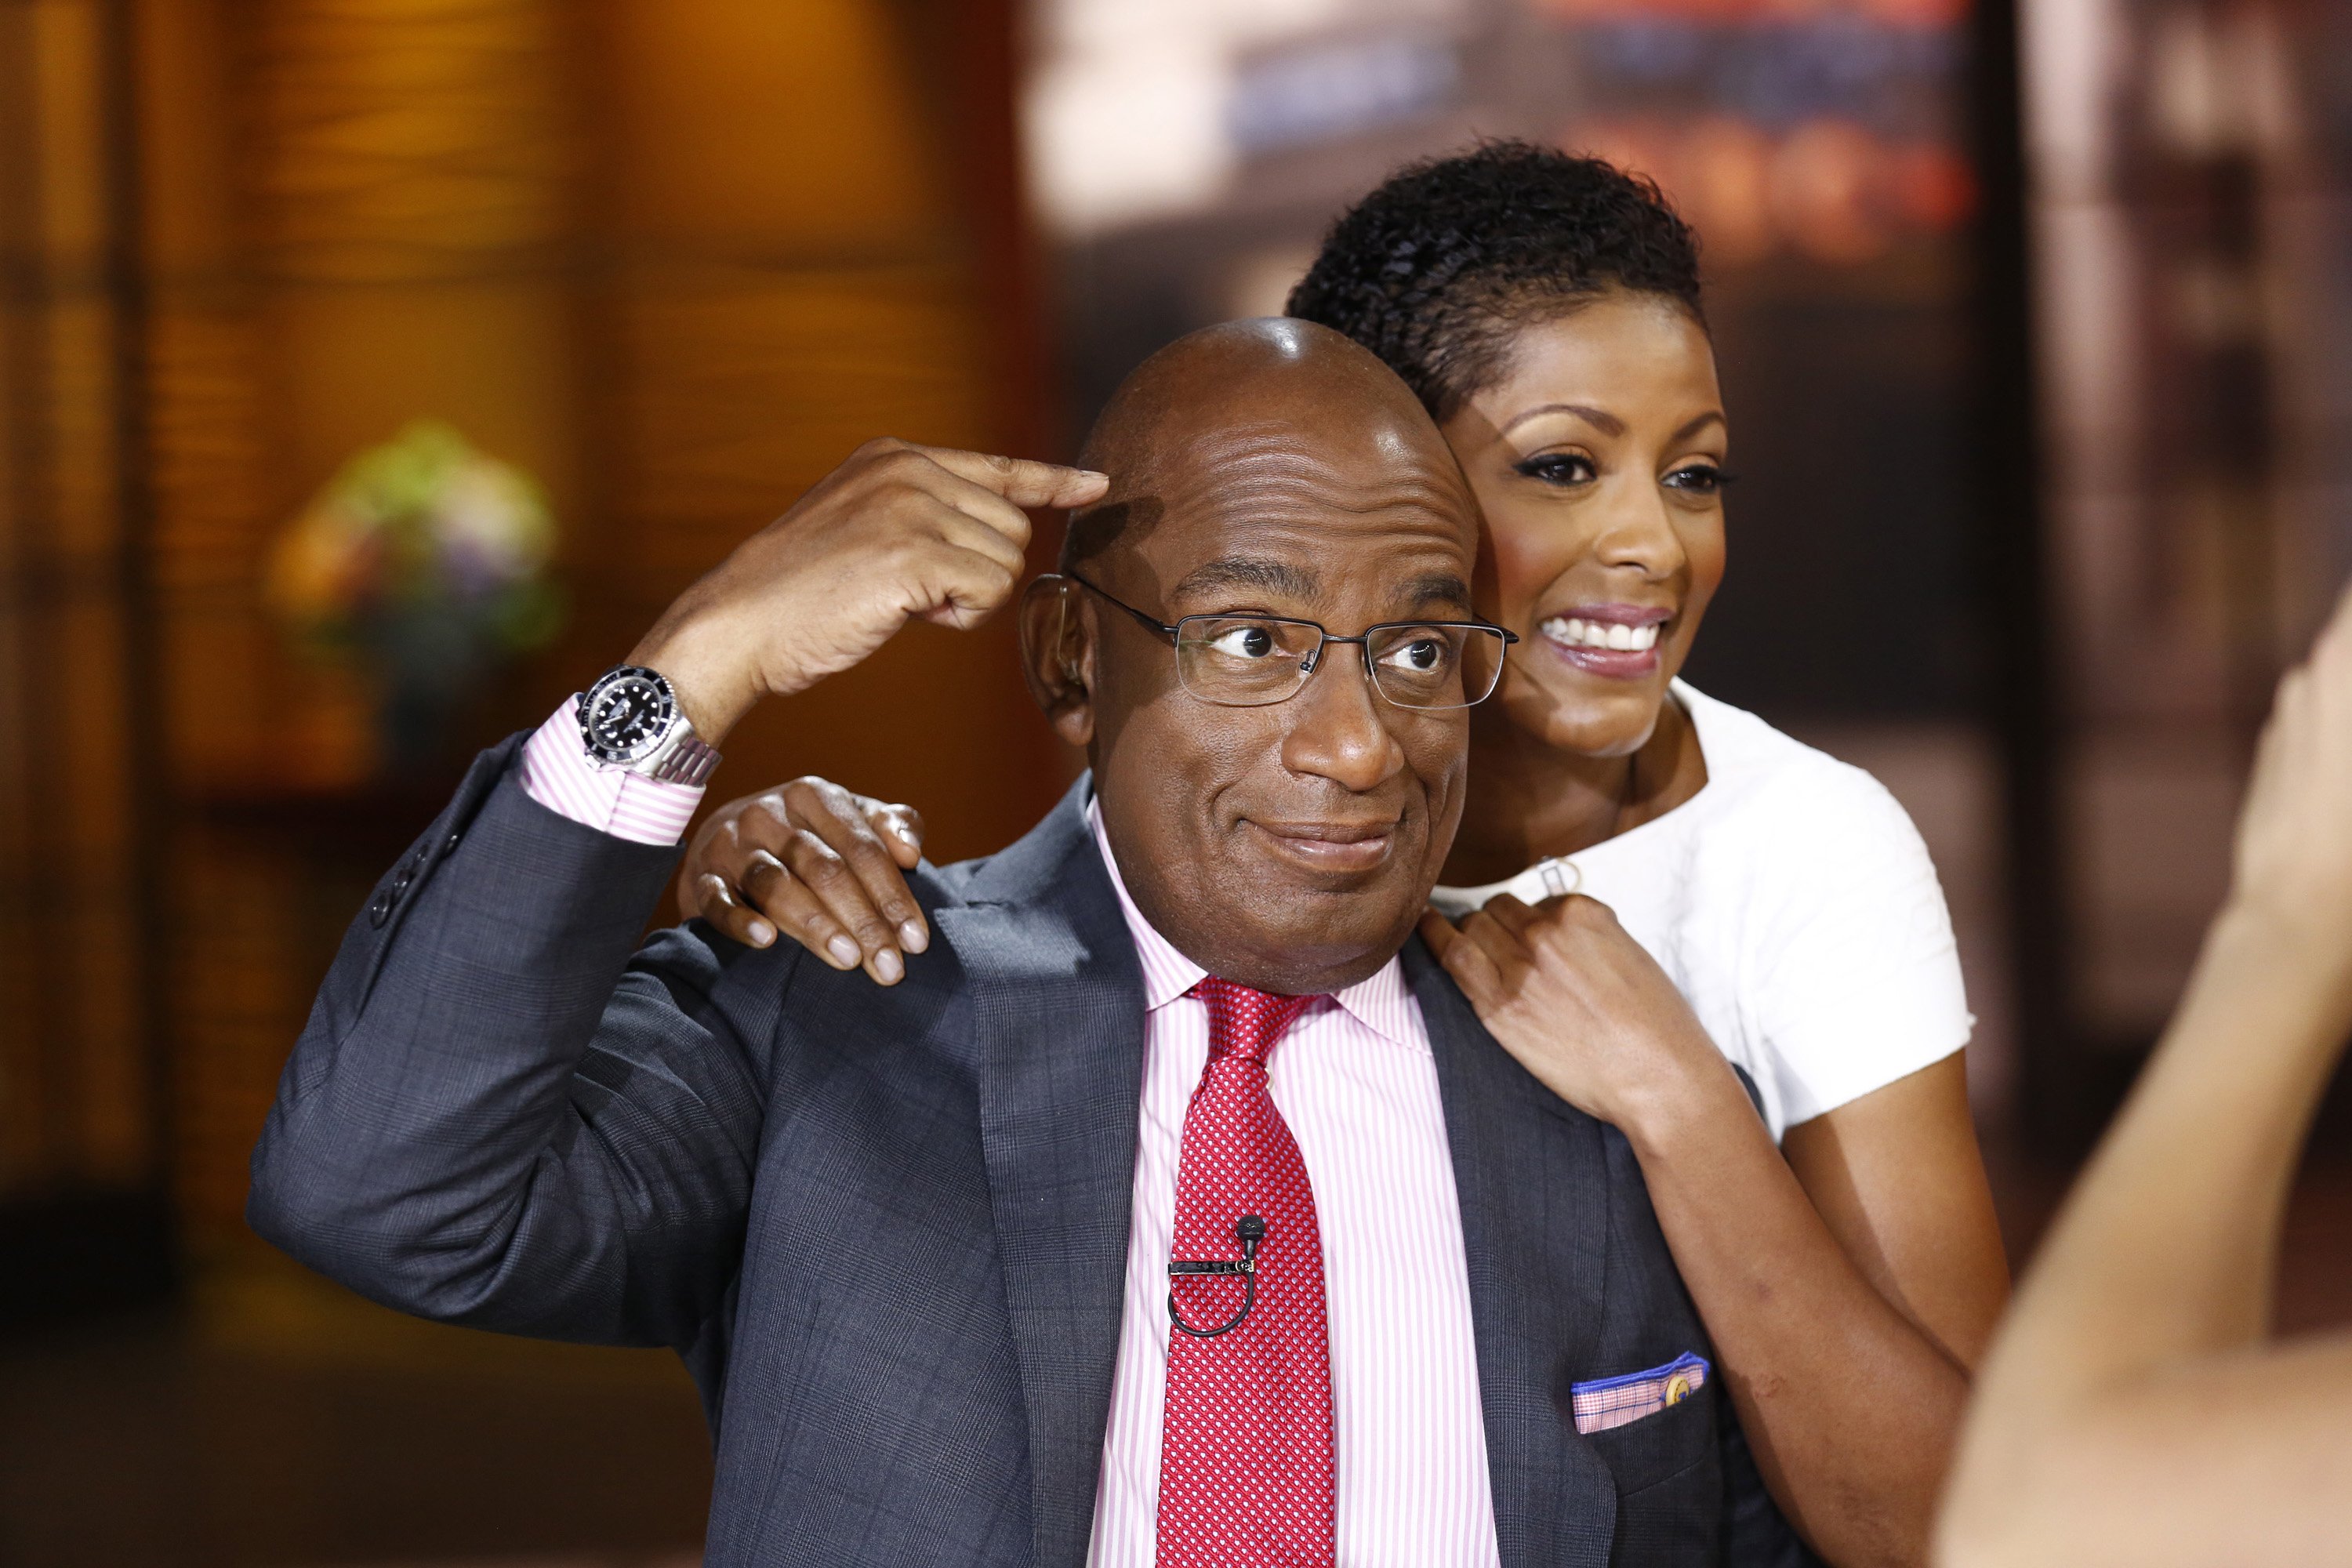 Al Roker and Tamron Hall on season 63 of NBC News' "Today" show on June 27, 2014 | Source: Getty Images